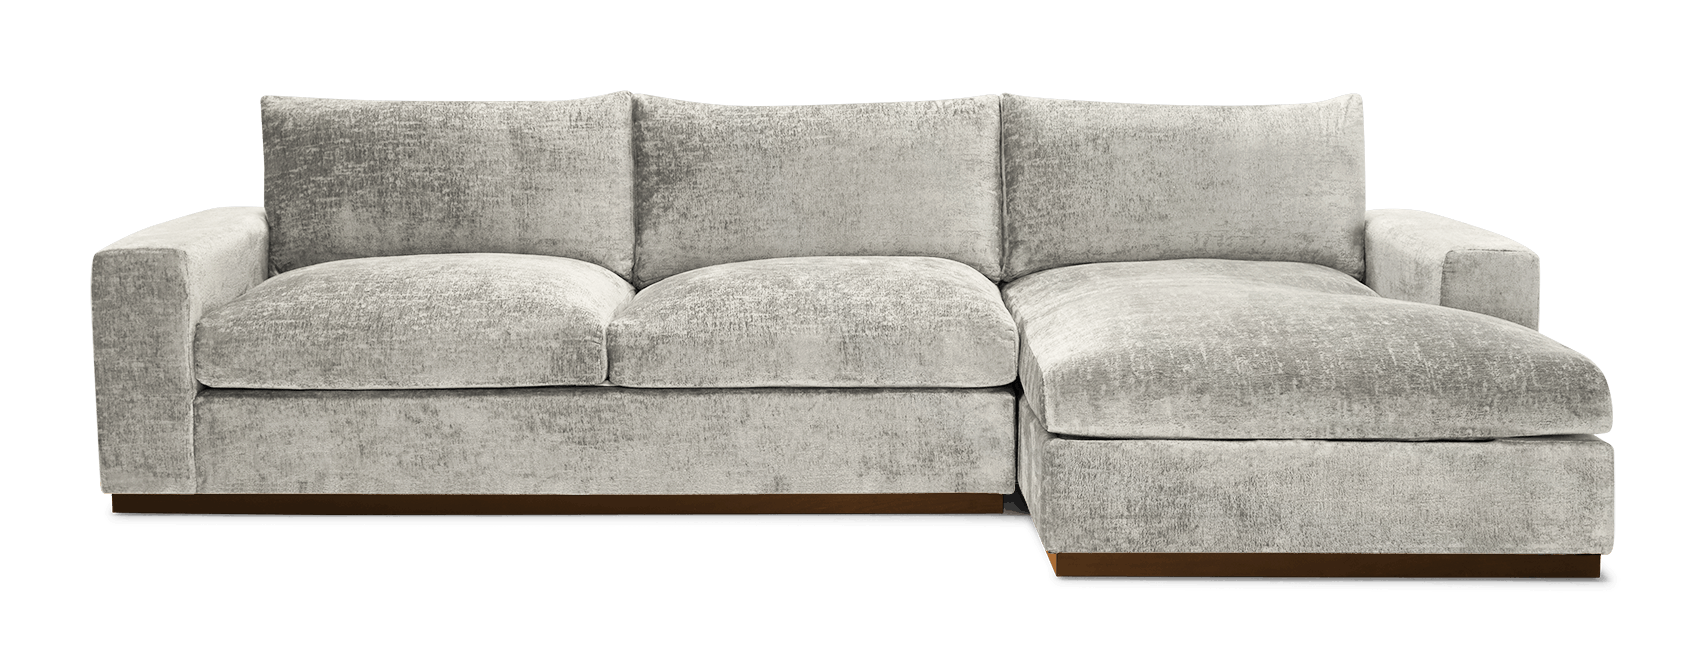 holt sectional with storage borough cotton